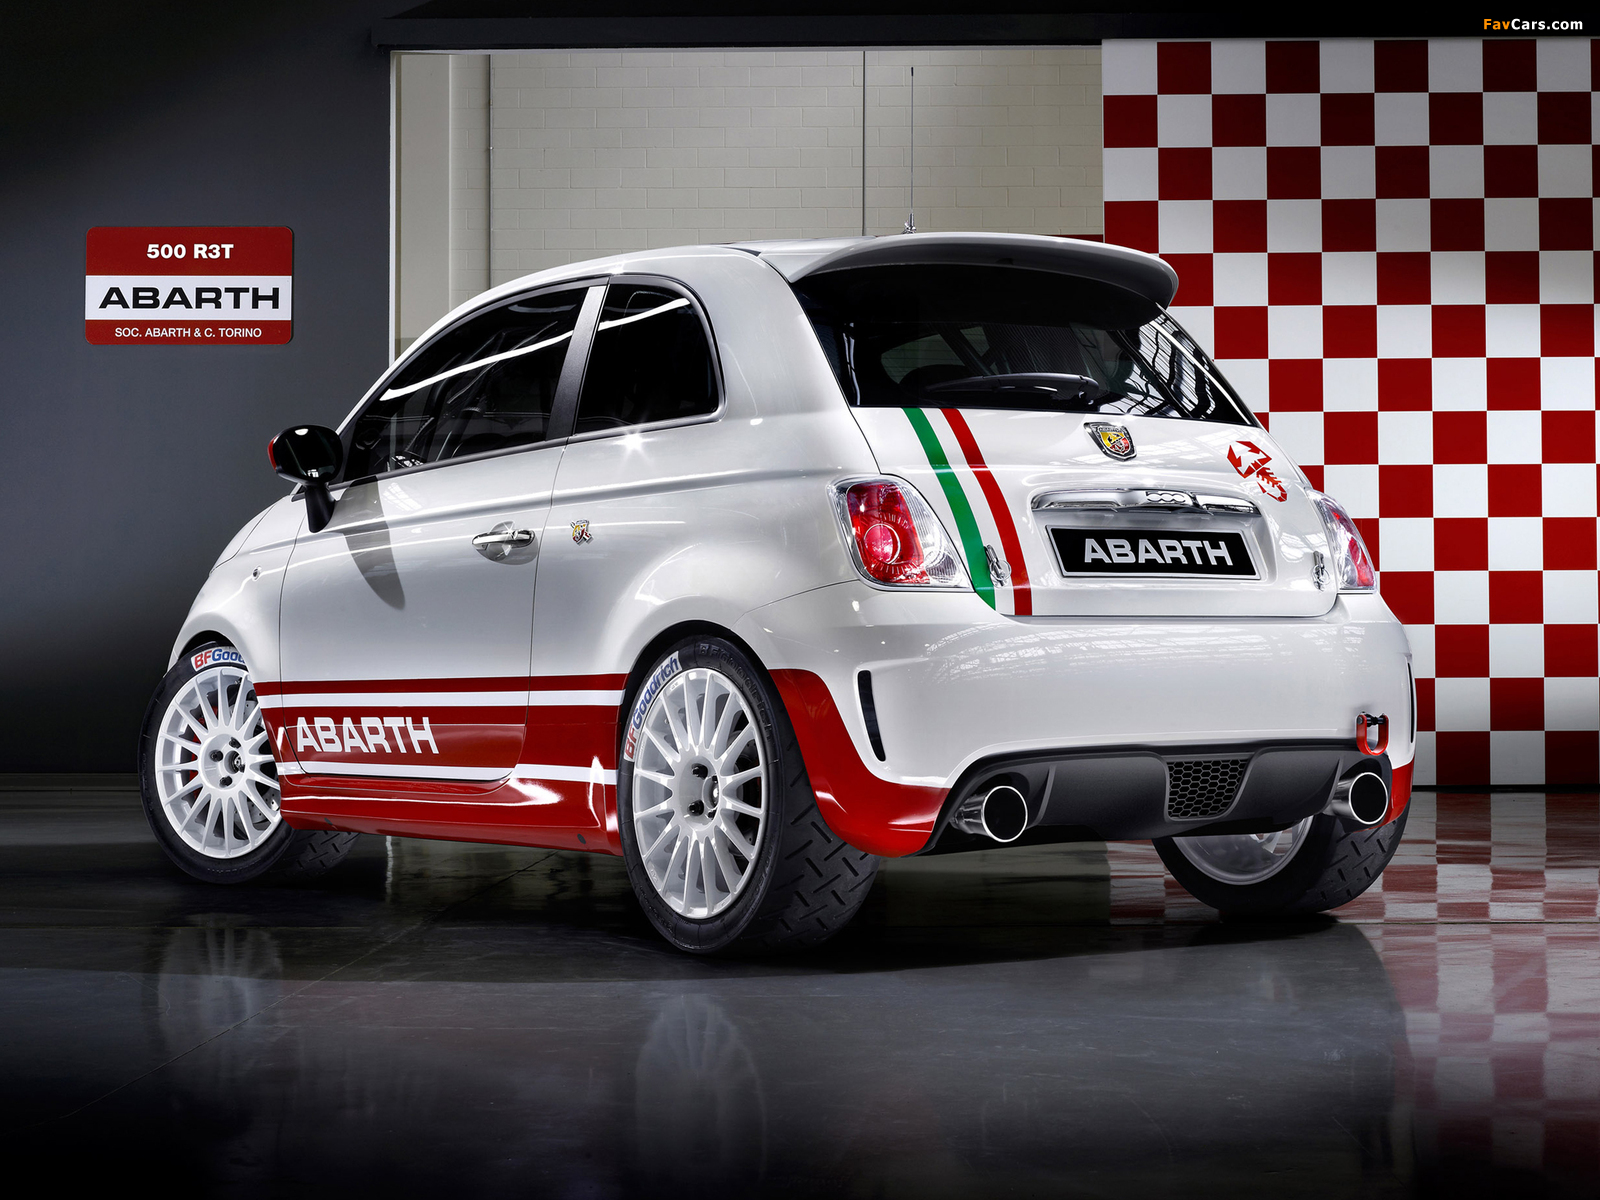 Abarth 500 R3T (2009) images (1600 x 1200)